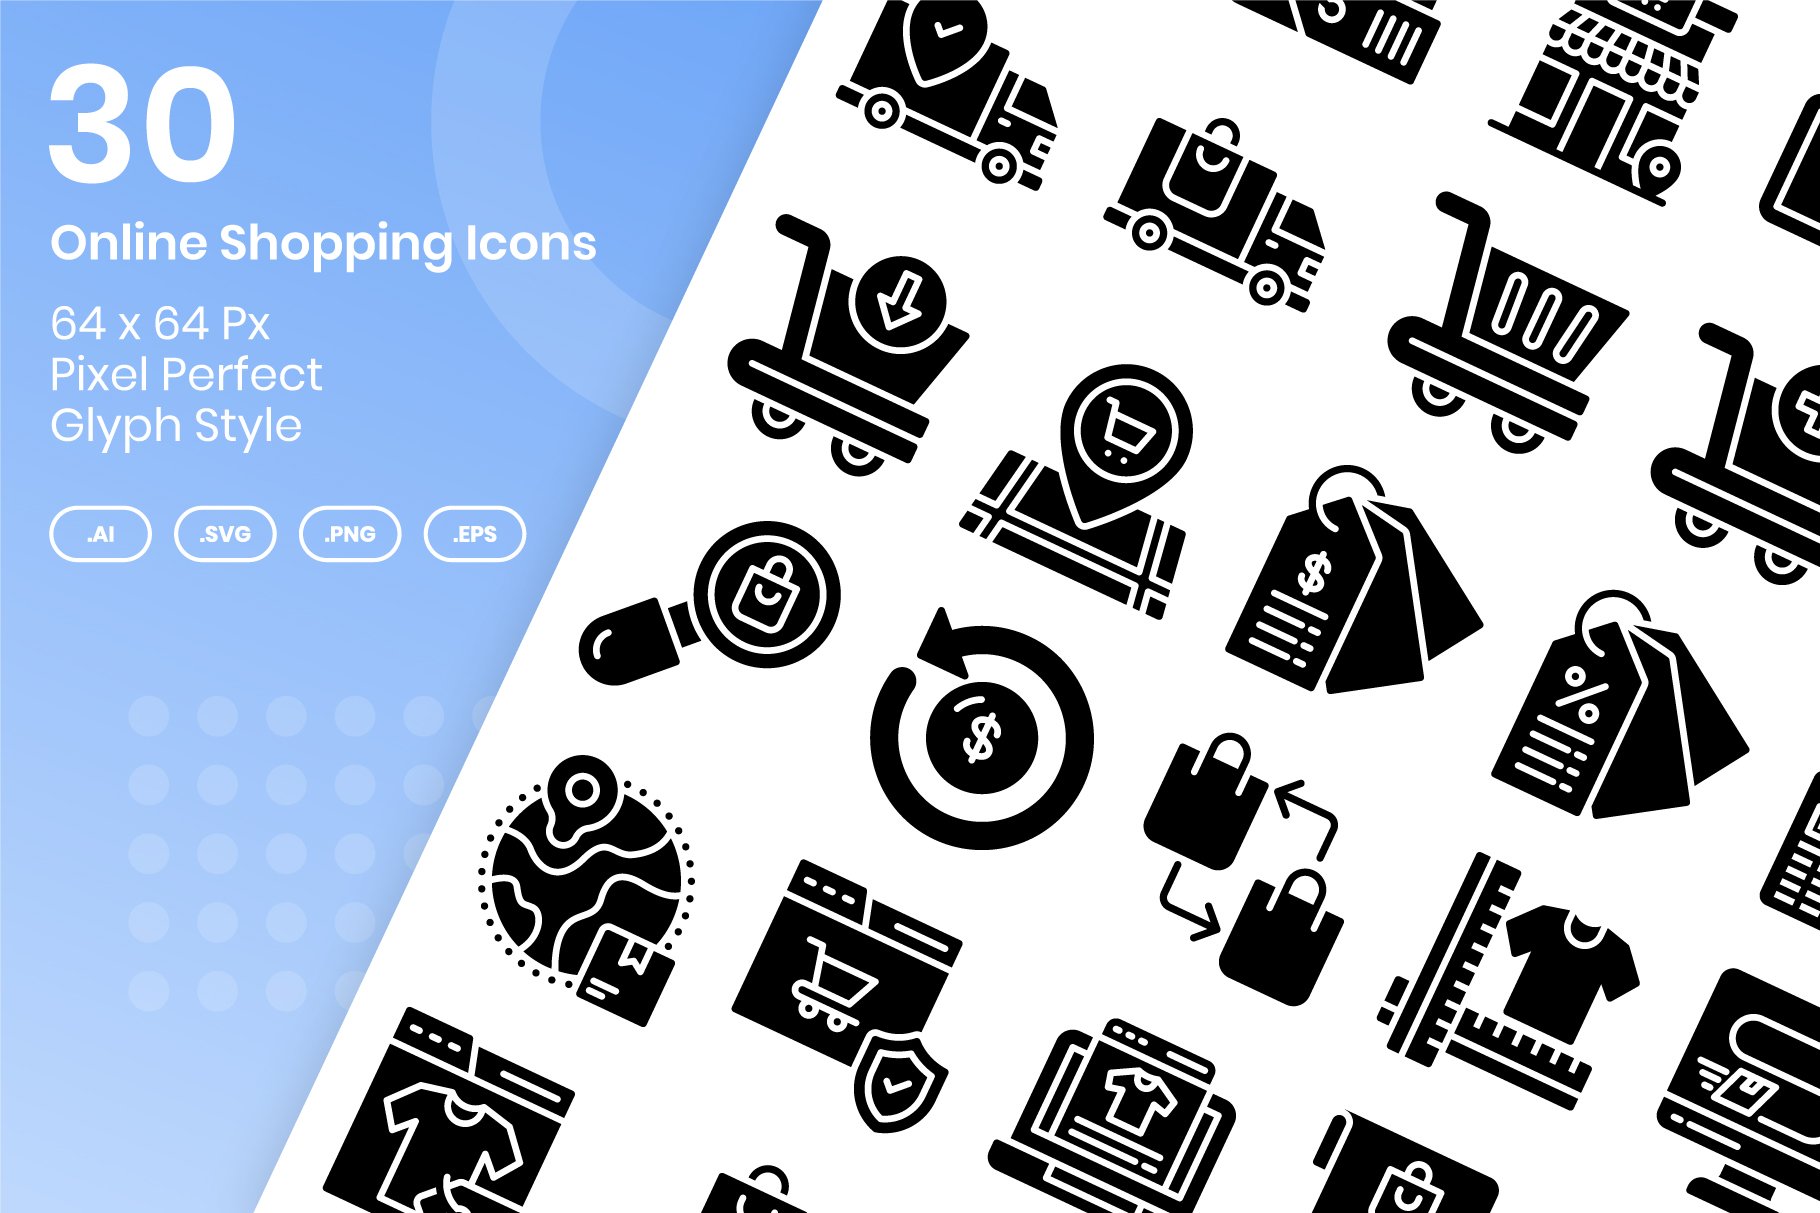 30 Online Shopping Icons Set - Glyph cover image.